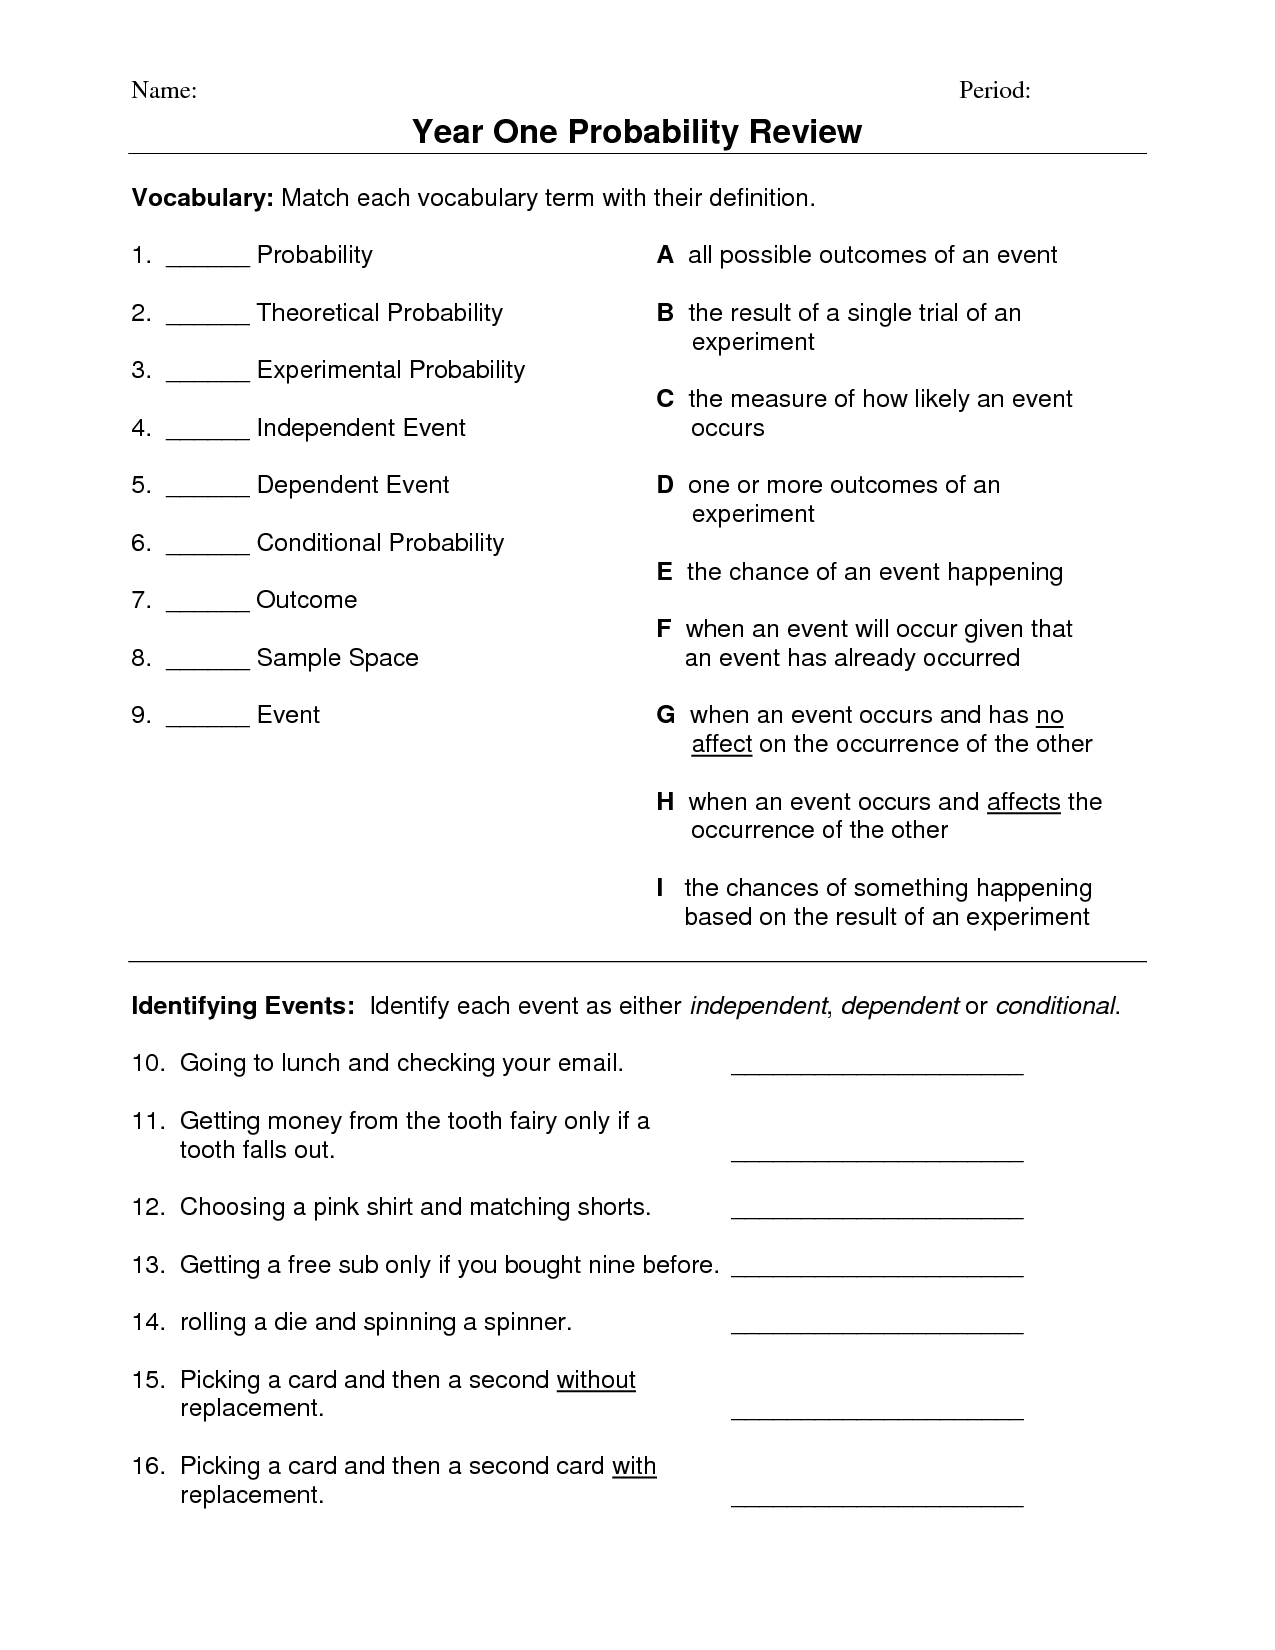 18-best-images-of-8th-grade-math-vocabulary-worksheets-8th-grade-math